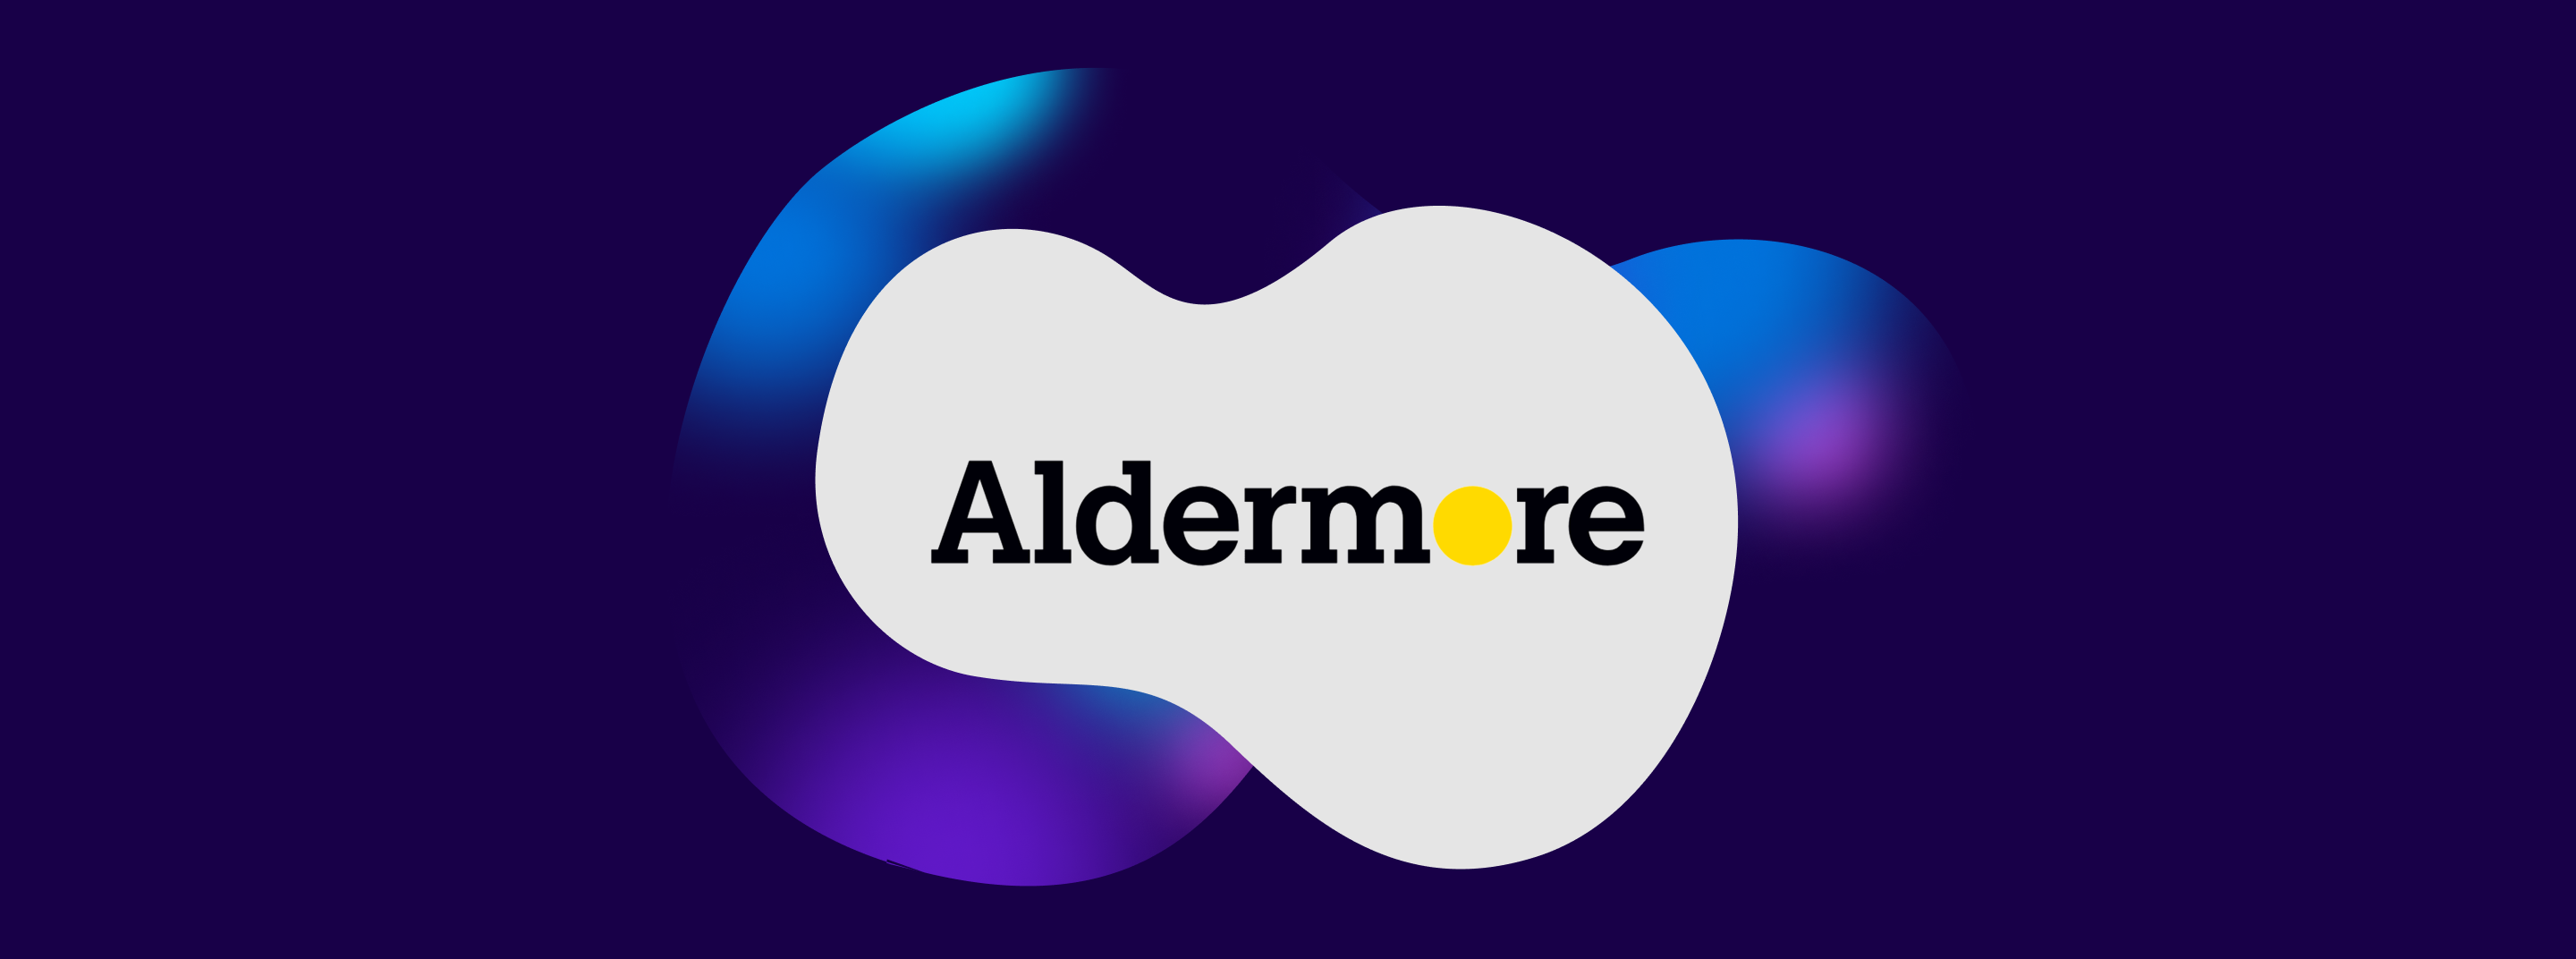 Aldermore logo on a white background with a dark blue blob in the background